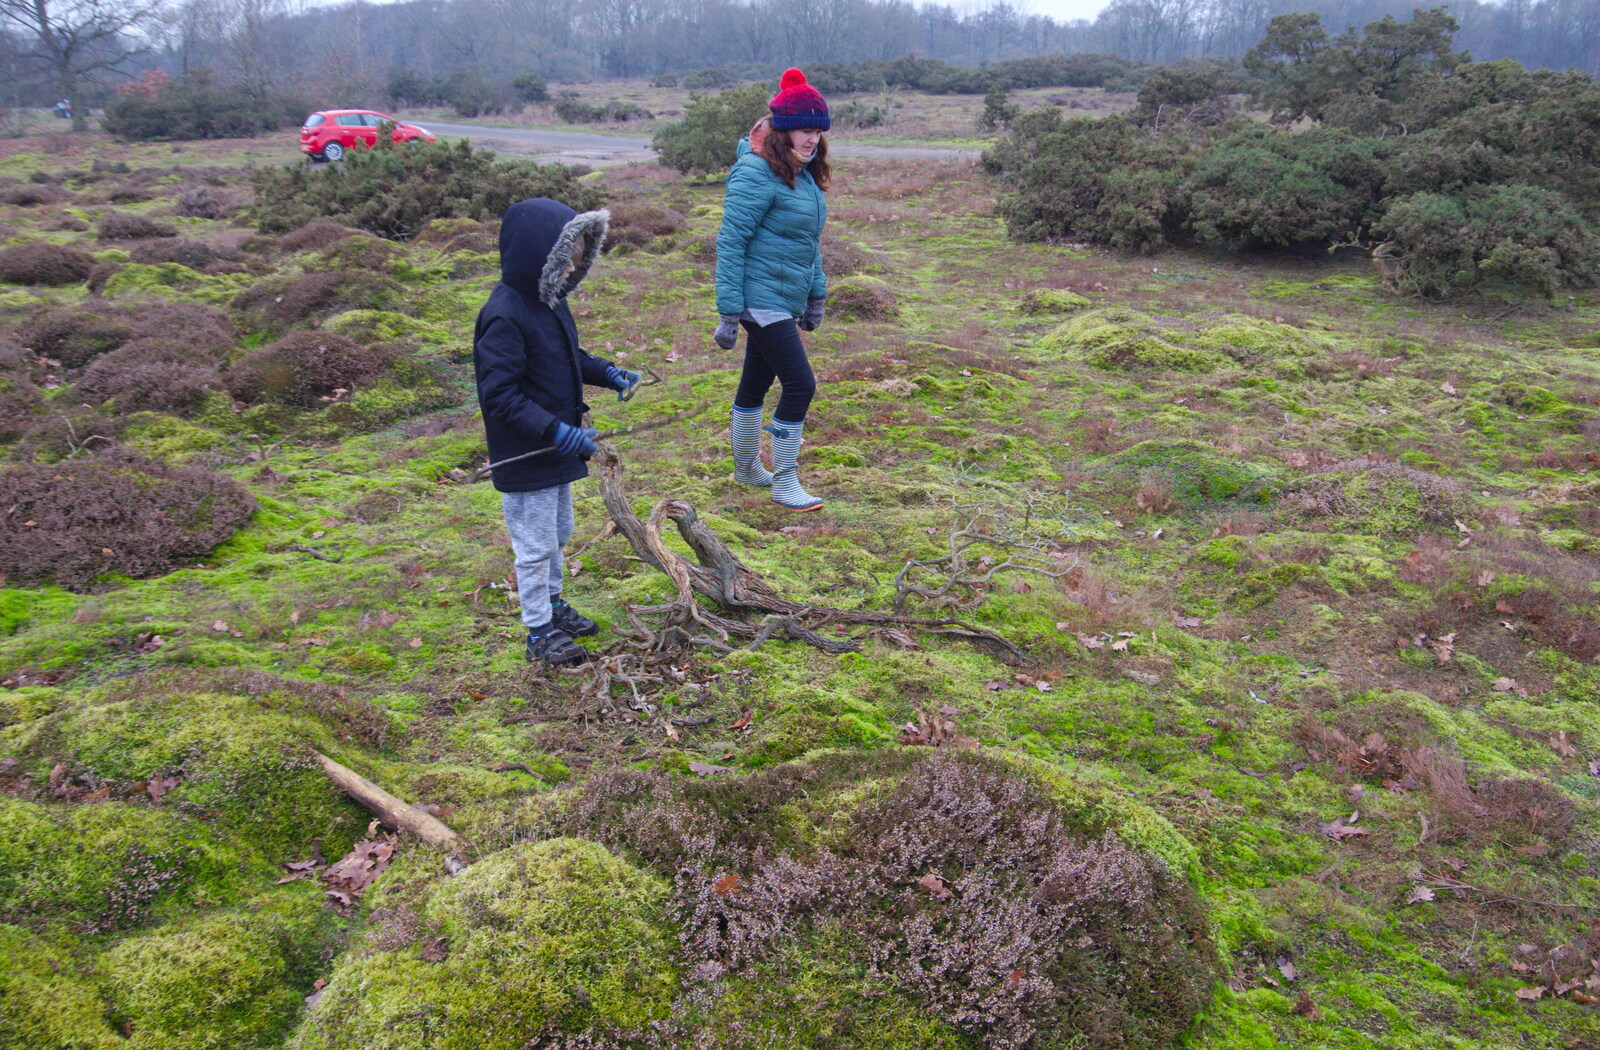 Harry investigates a gnarled gorse stump from New Year's Day on the Ling, Wortham, Suffolk - 1st January 2020